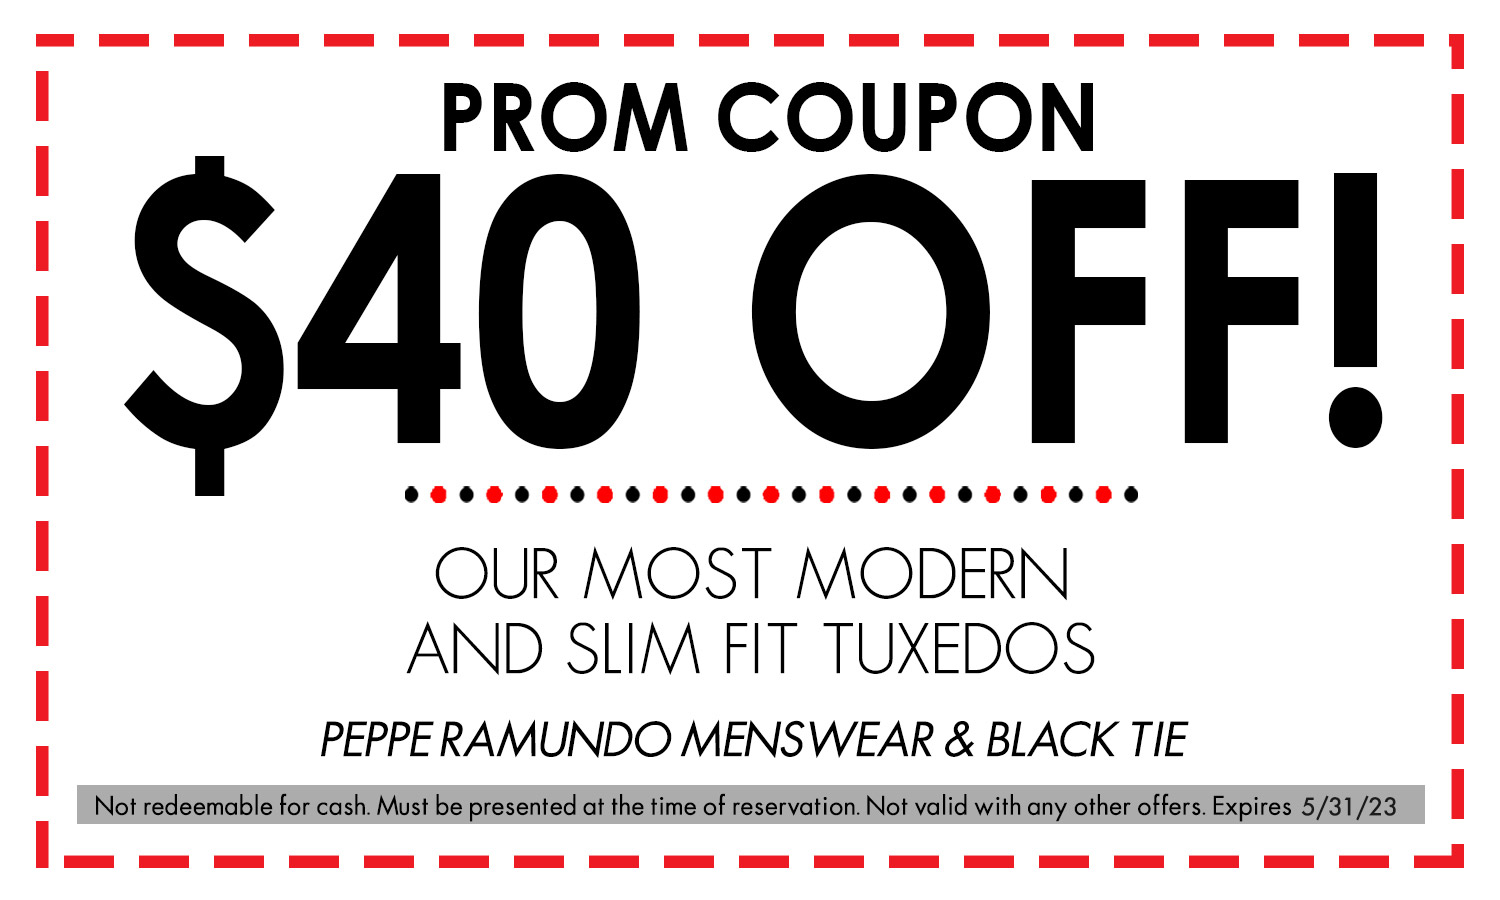 Prom Coupon